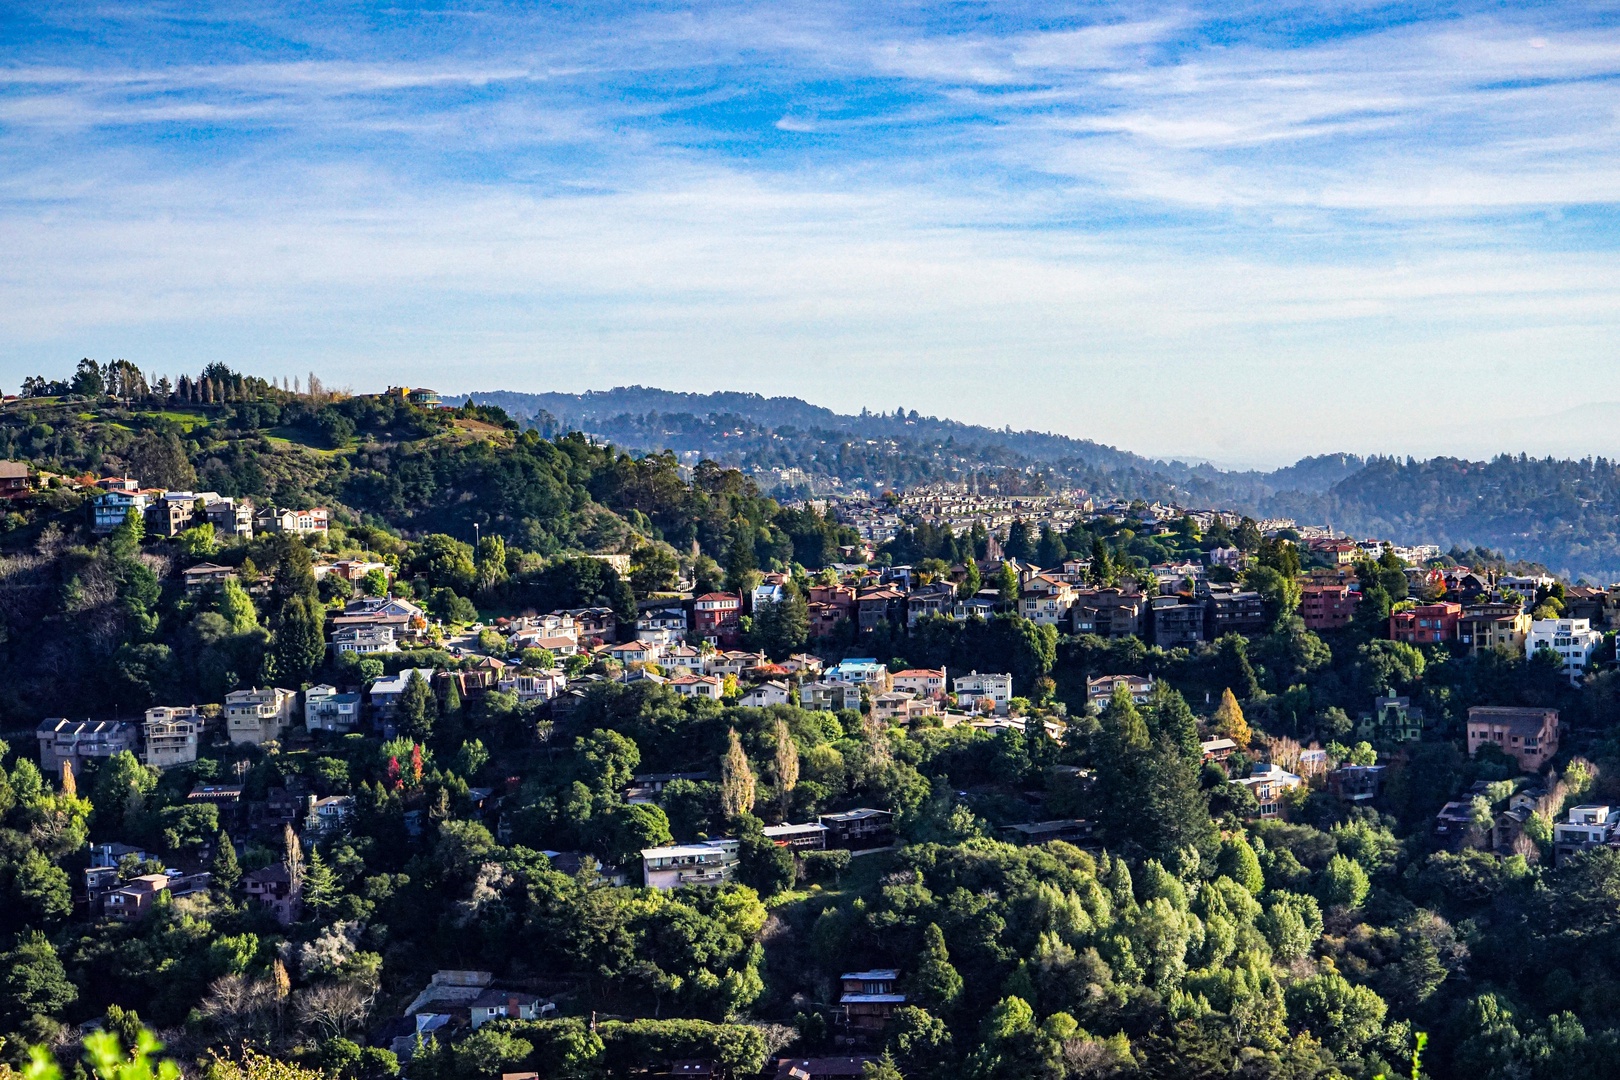 homes in the east bay hills_getty